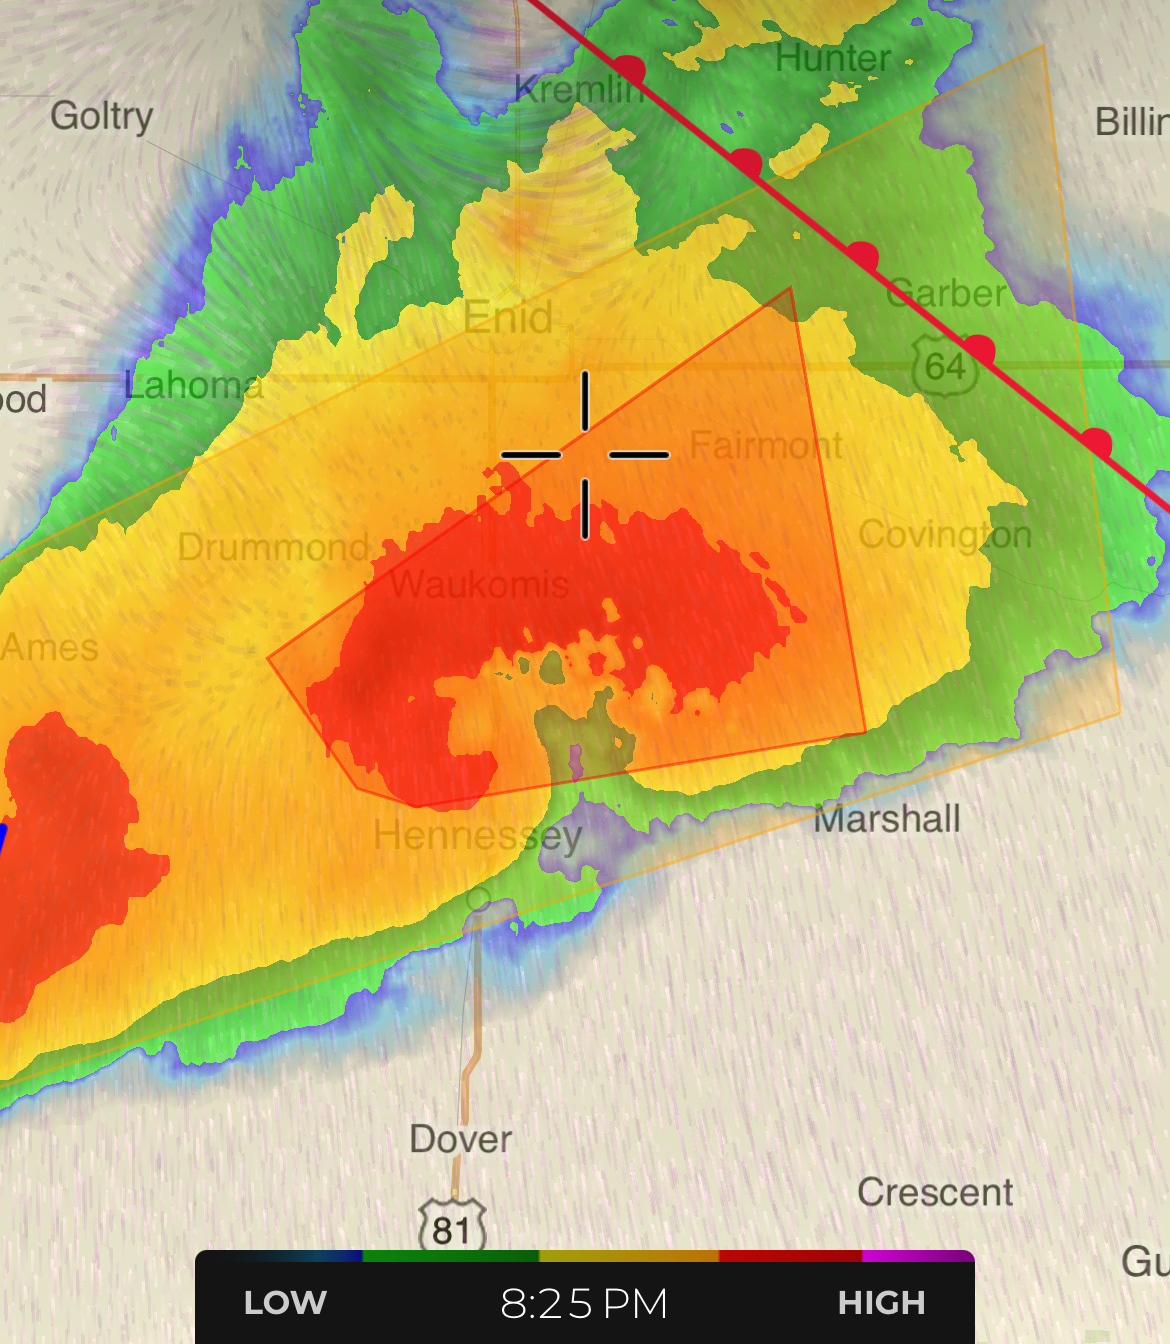 Strong hook on monster Supercell!
#MonitoringFromHome